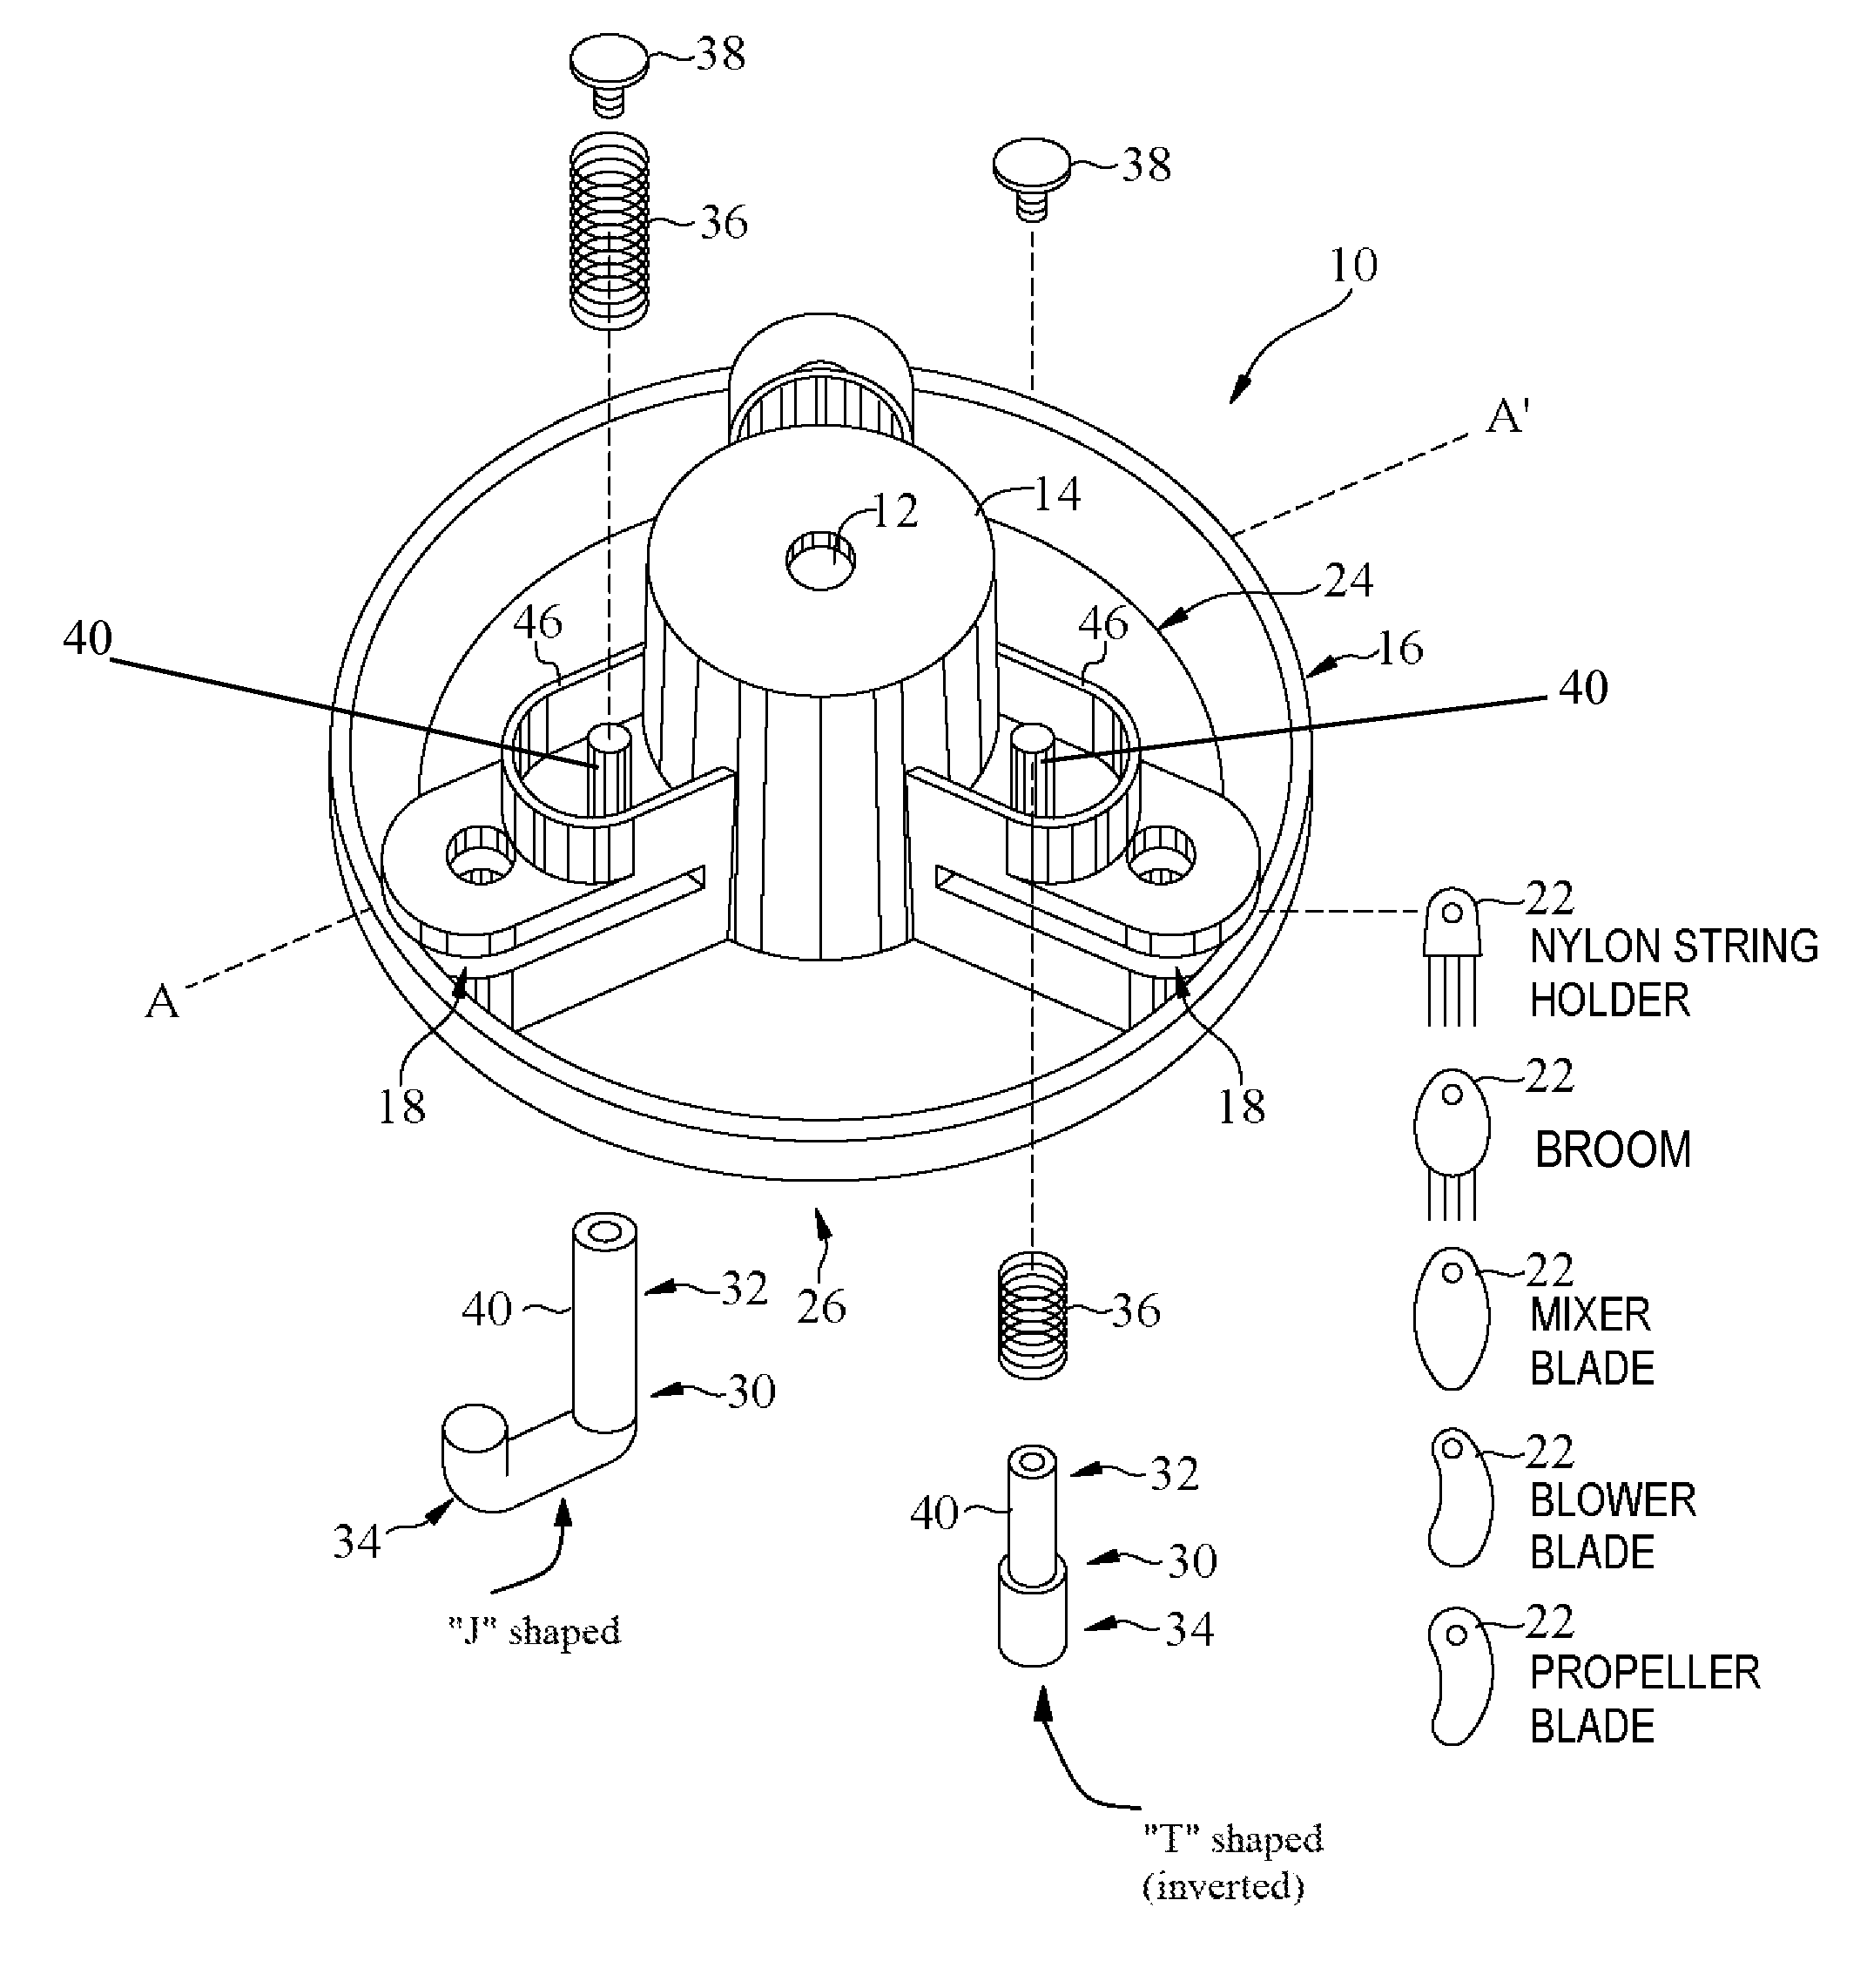 Rotary trimmer apparatus and related rotary head assembly